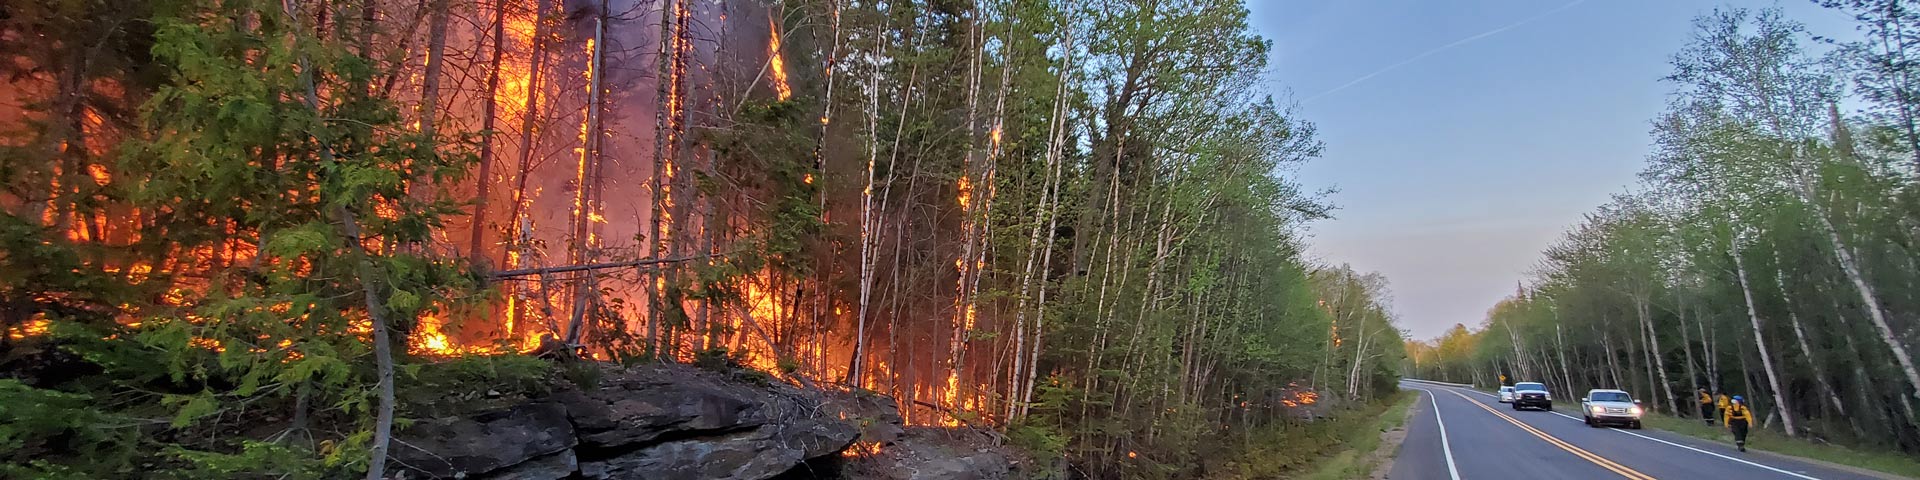 Fire burns next to the road during the Lac Modène prescribed fire in La Mauricie National Park. Fire crew members are pictured in the distance.